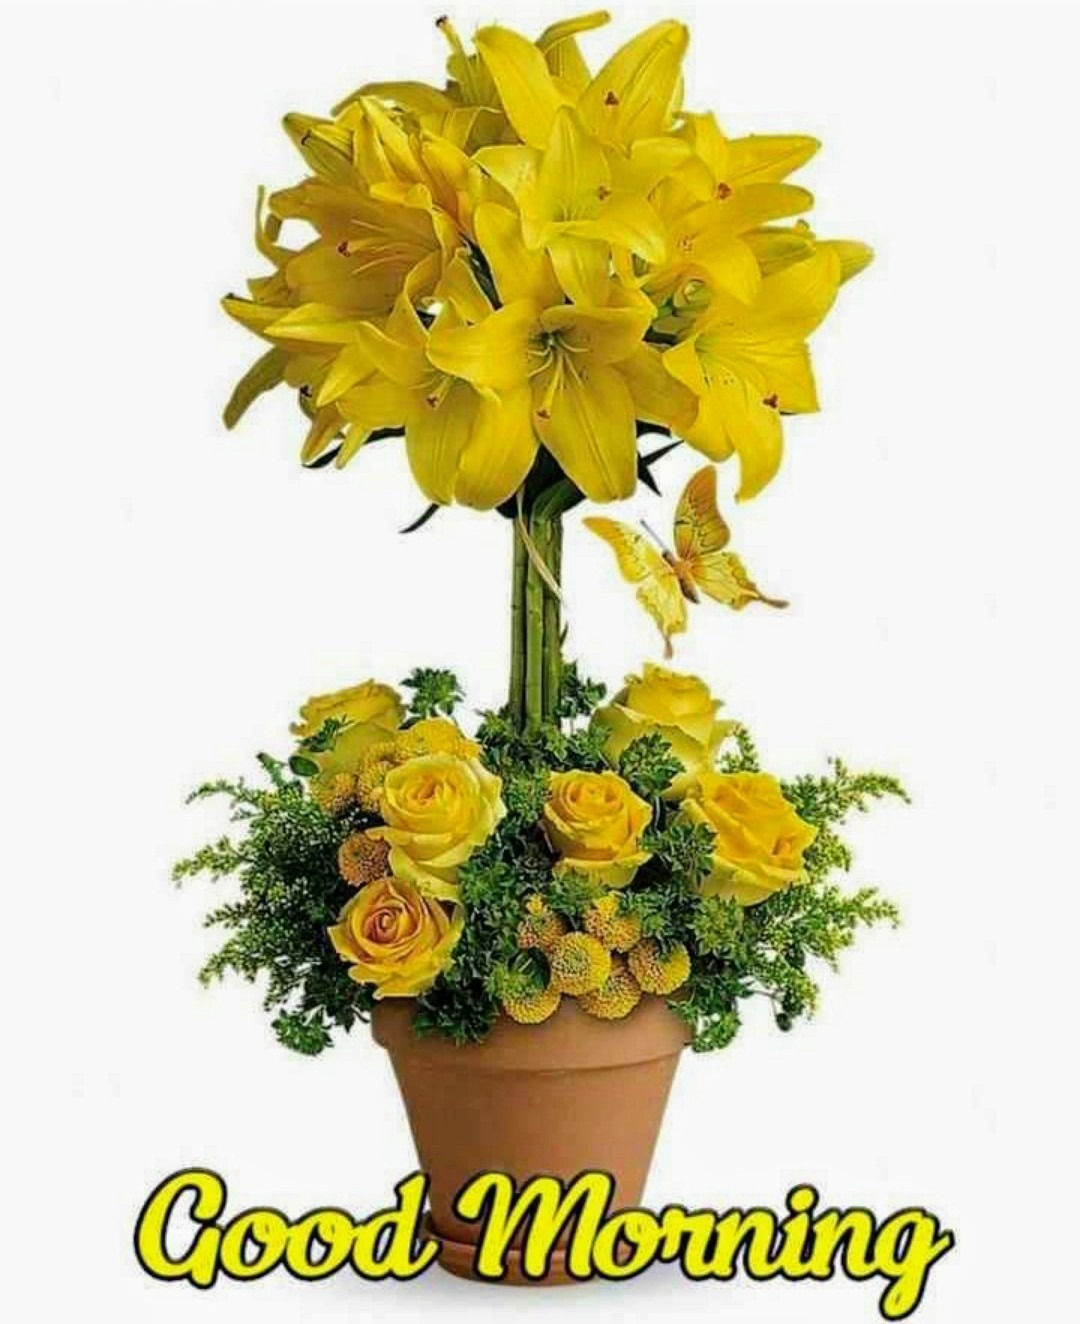 Beautiful Good Morning With Yellow Roses - DesiComments.com